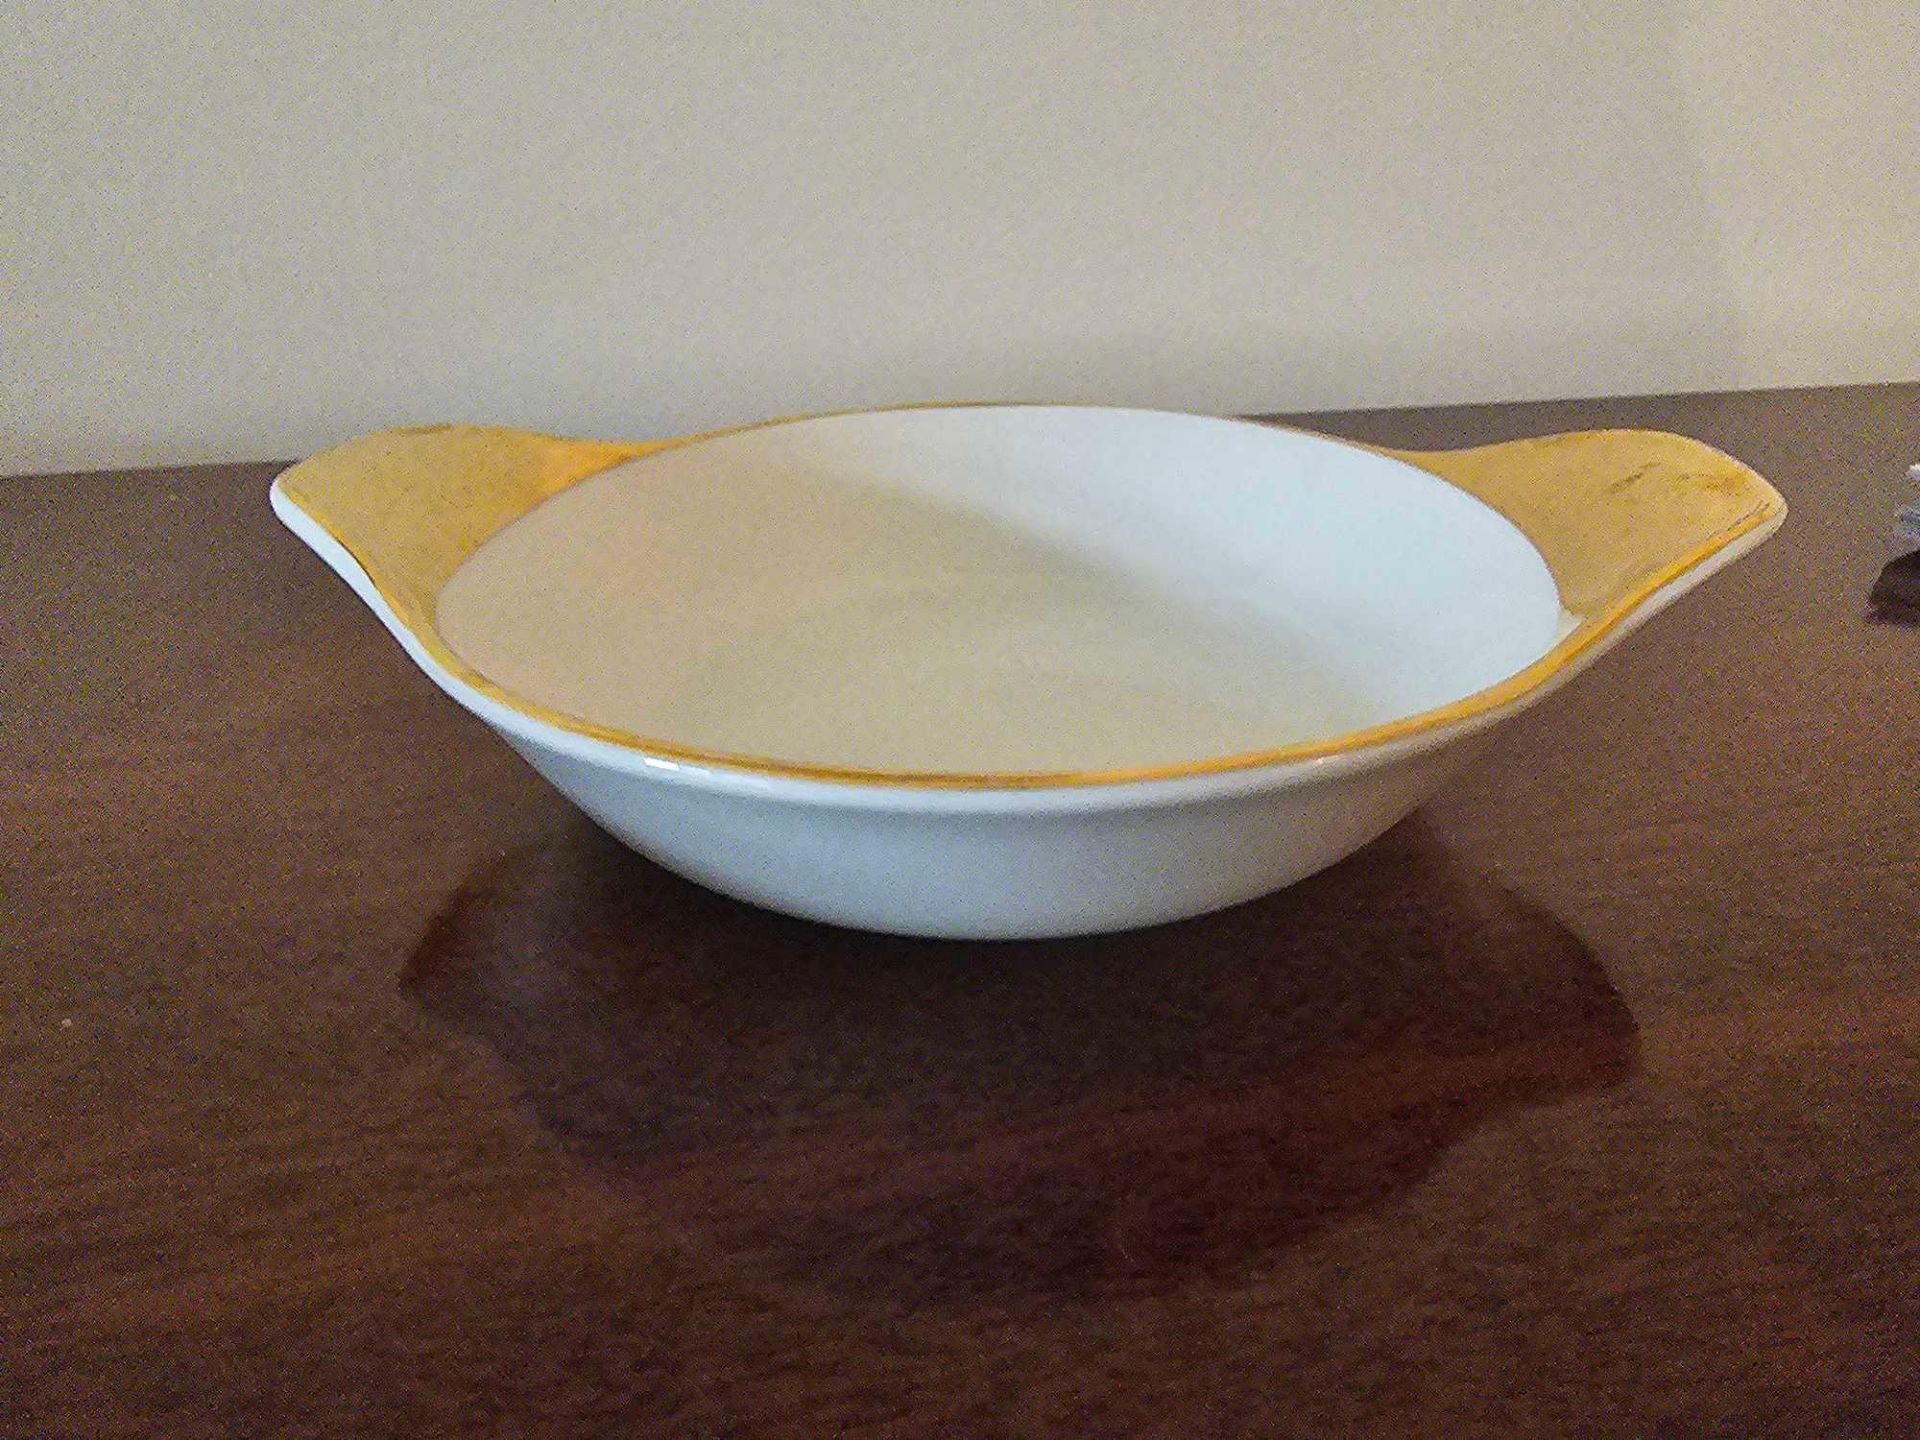 Royal Worcester A Set Of 8 Gold Gilded And White Lugged Rim Oven To Tableware Porcelain Dishes - Image 3 of 4